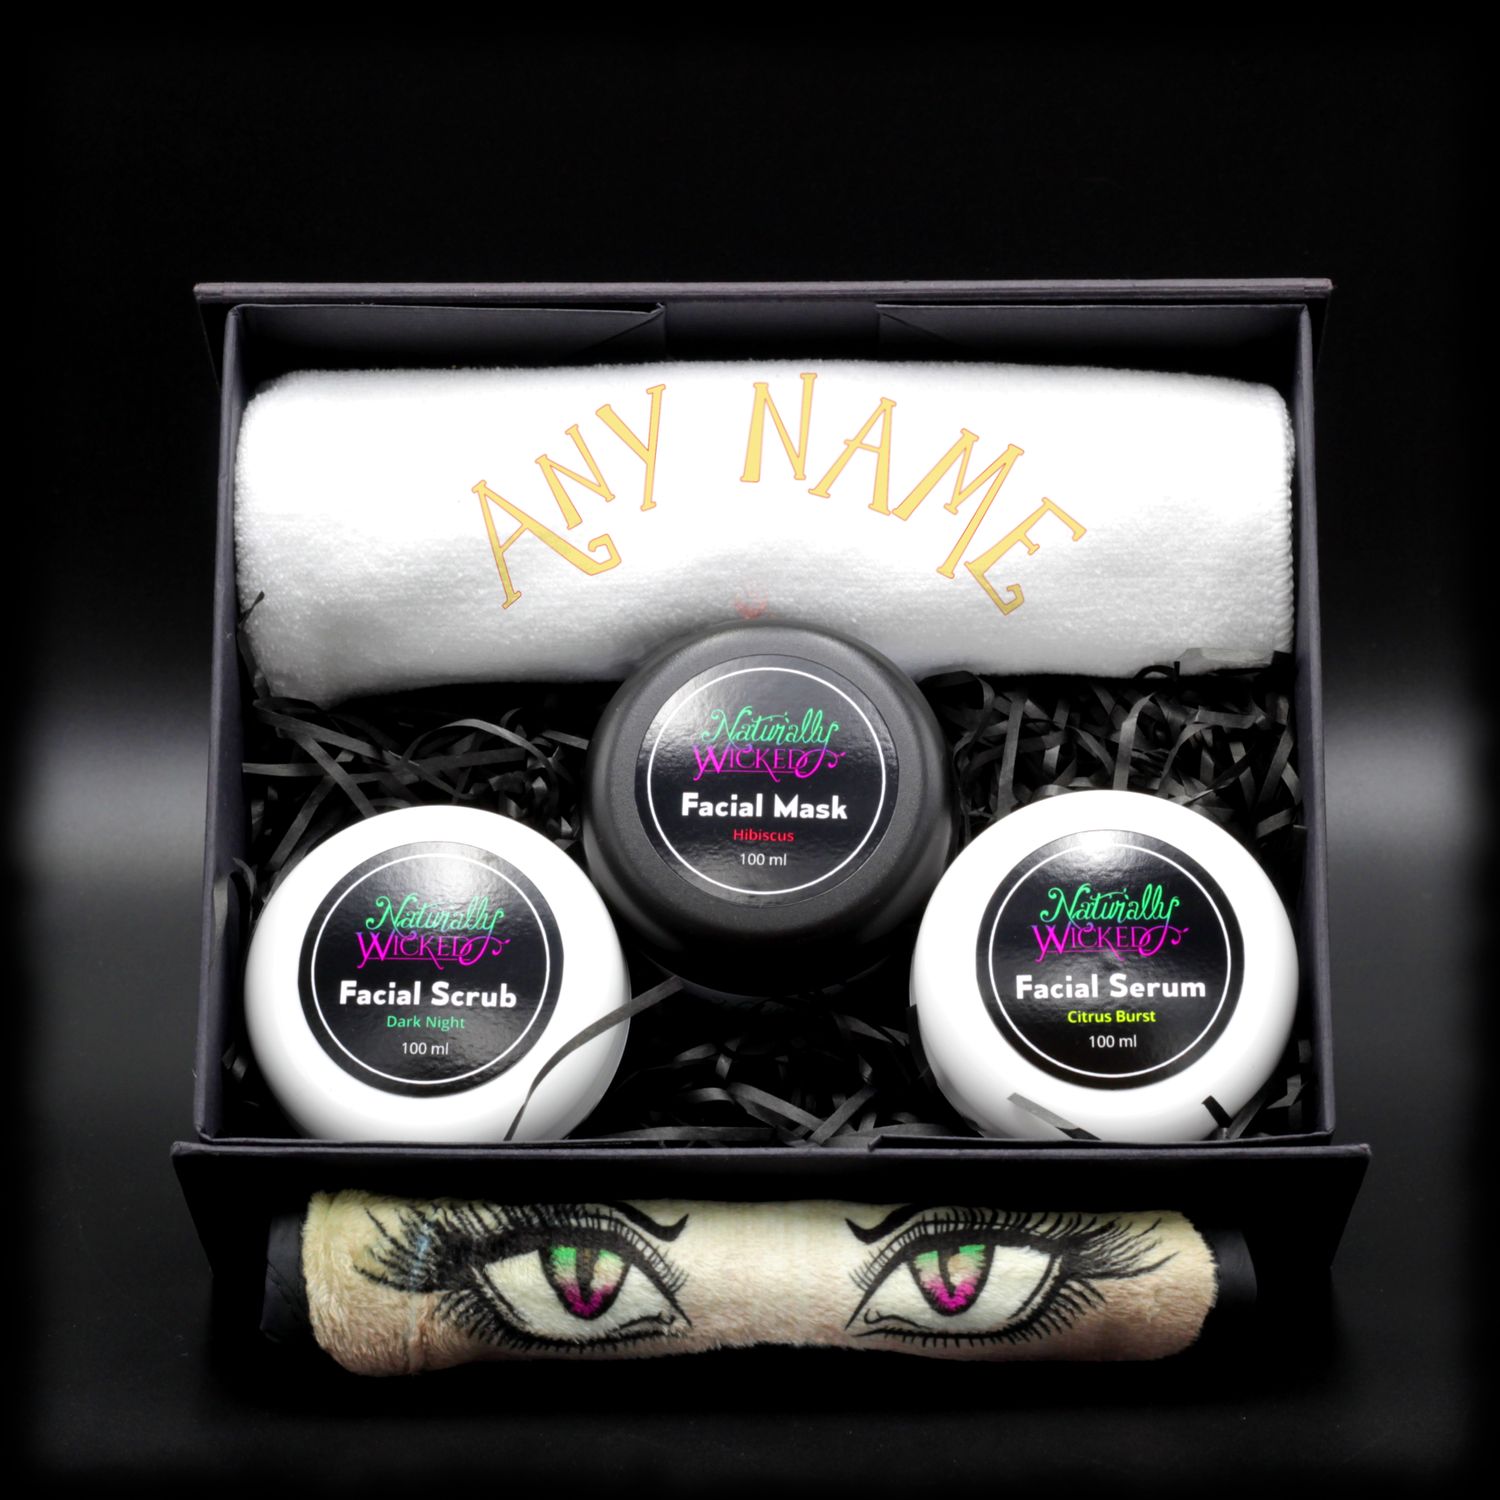 Naturally Wicked Facial Kit With Personalised Wicked Fire Queen Towel, Facial Scrub, Facial Mask & Facial Serum - Perfect Gift For Her